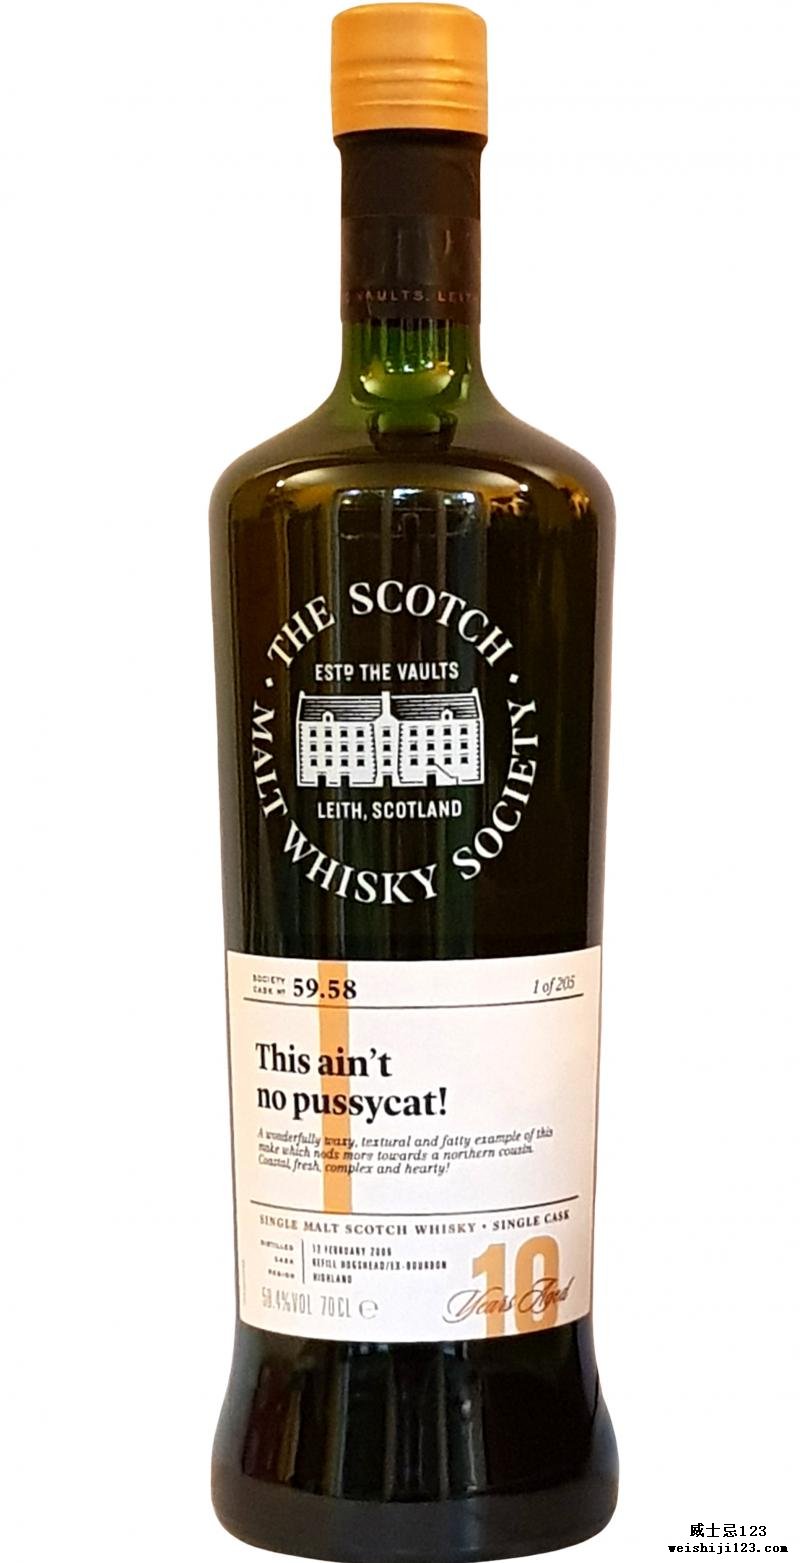 Teaninich 2009 SMWS 59.58